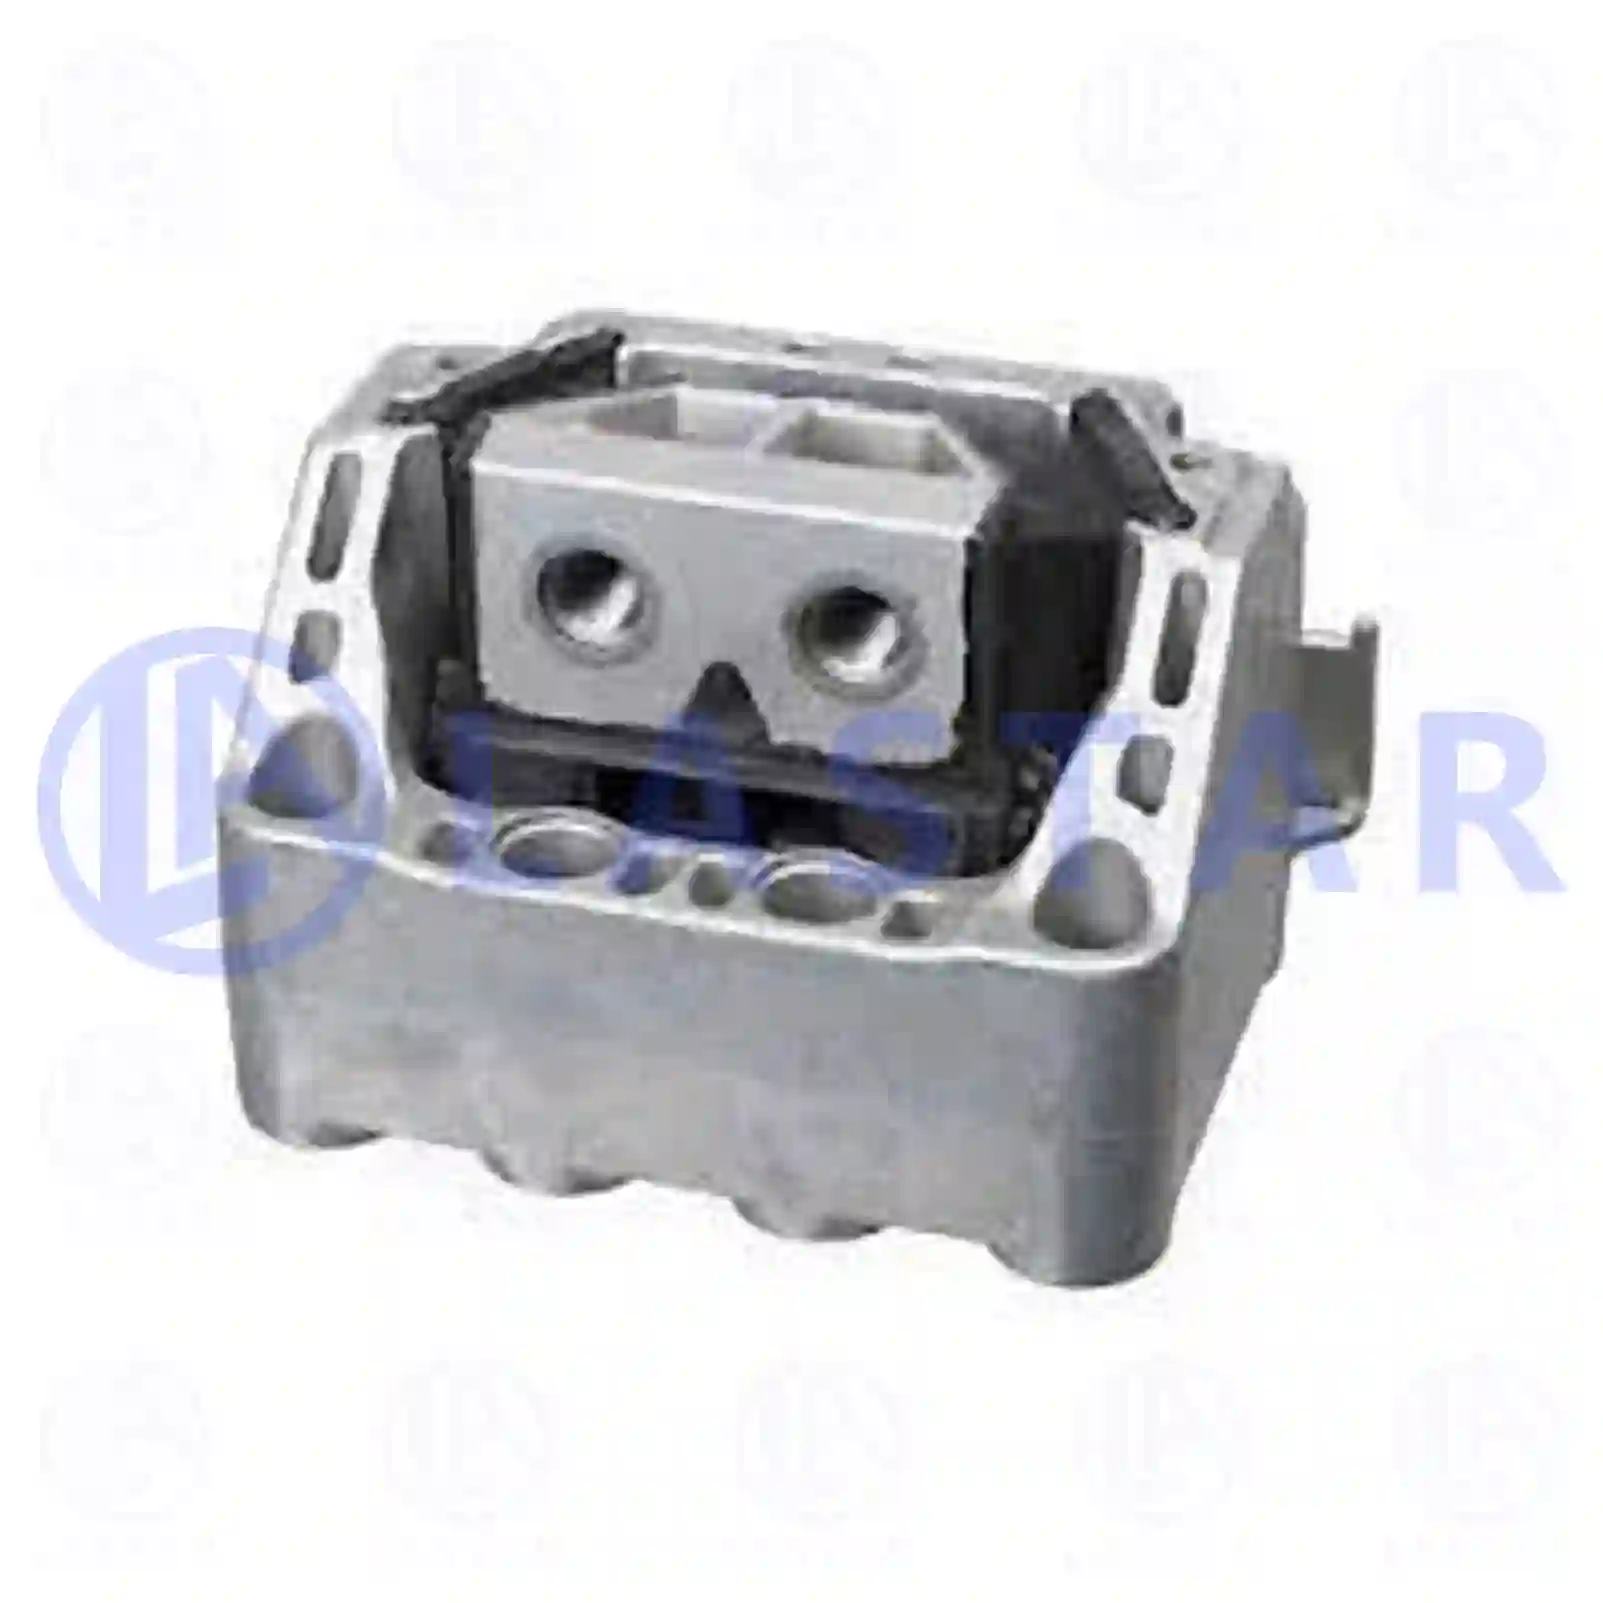 Engine mounting, 77702455, 9602412113 ||  77702455 Lastar Spare Part | Truck Spare Parts, Auotomotive Spare Parts Engine mounting, 77702455, 9602412113 ||  77702455 Lastar Spare Part | Truck Spare Parts, Auotomotive Spare Parts